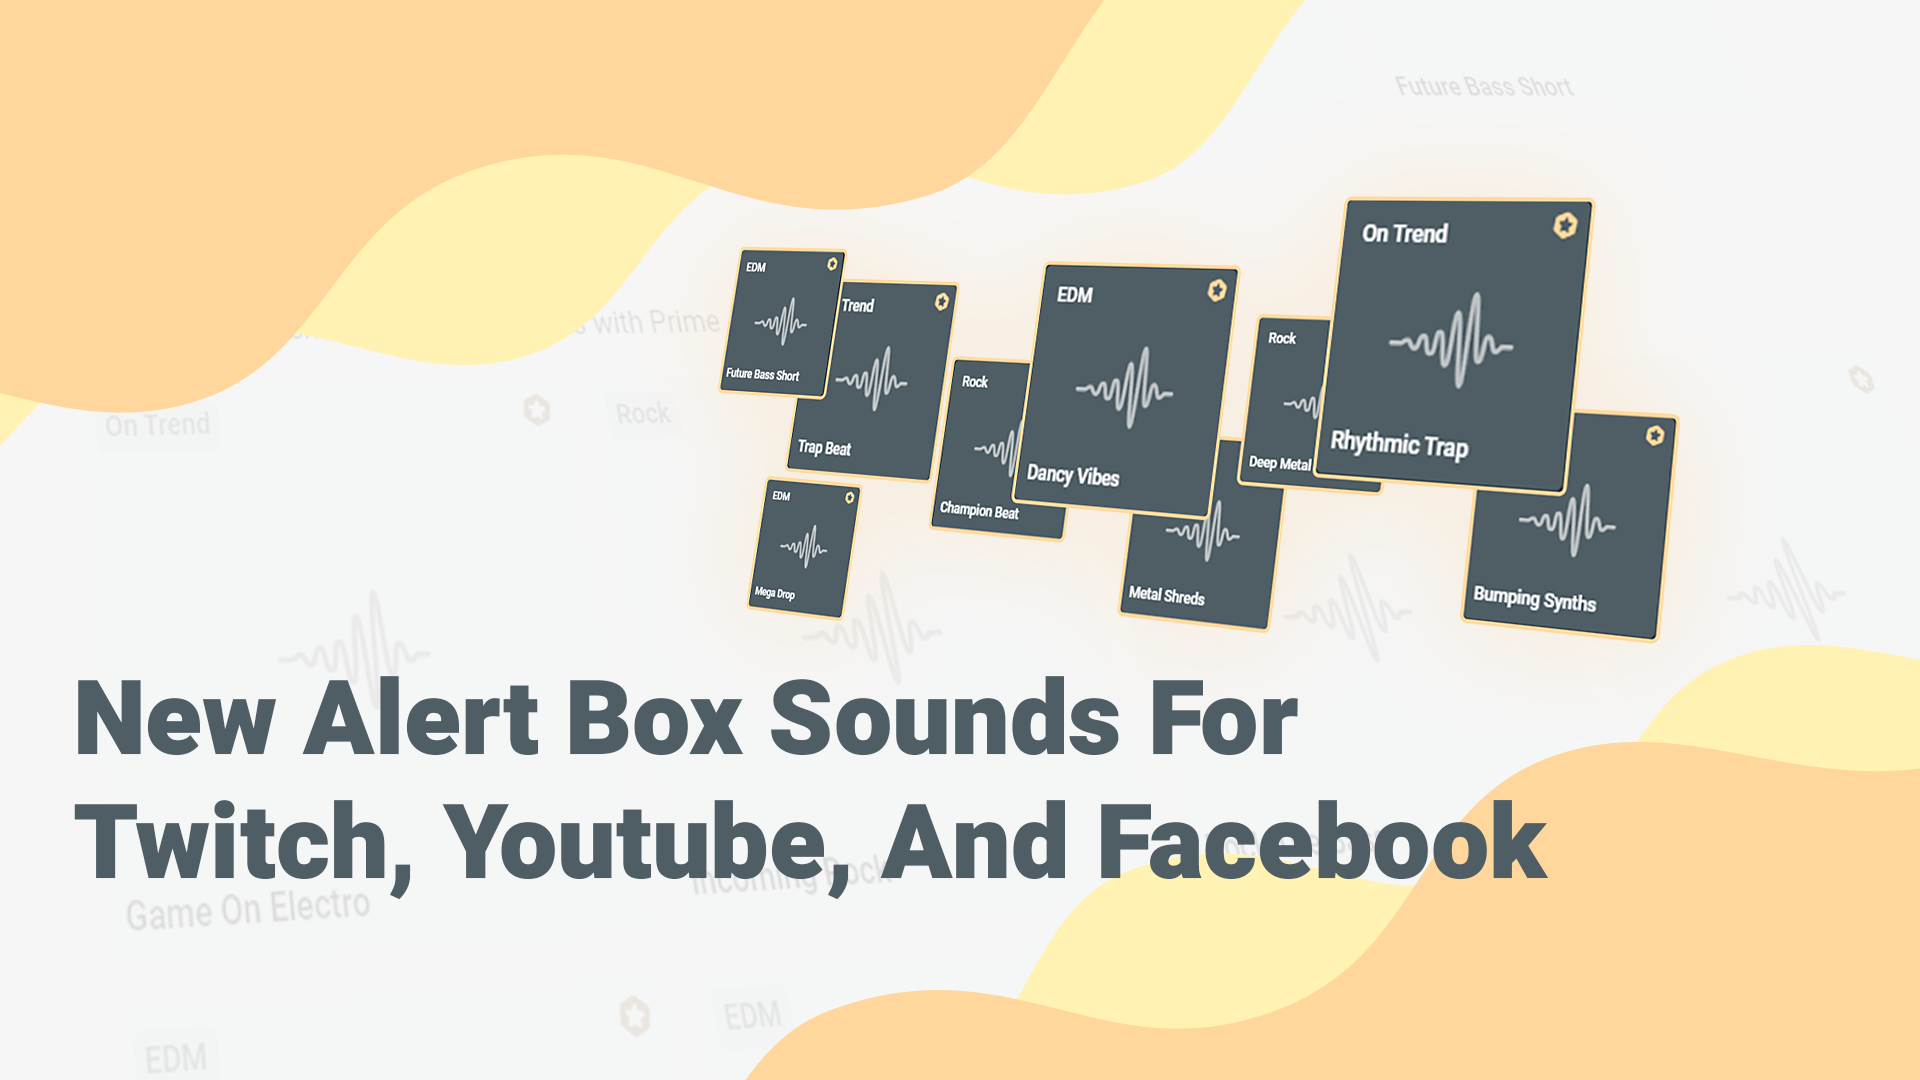 How To Add Live Stream Alert Sounds For Twitch Youtube And Facebook By Ethan May Streamlabs Blog